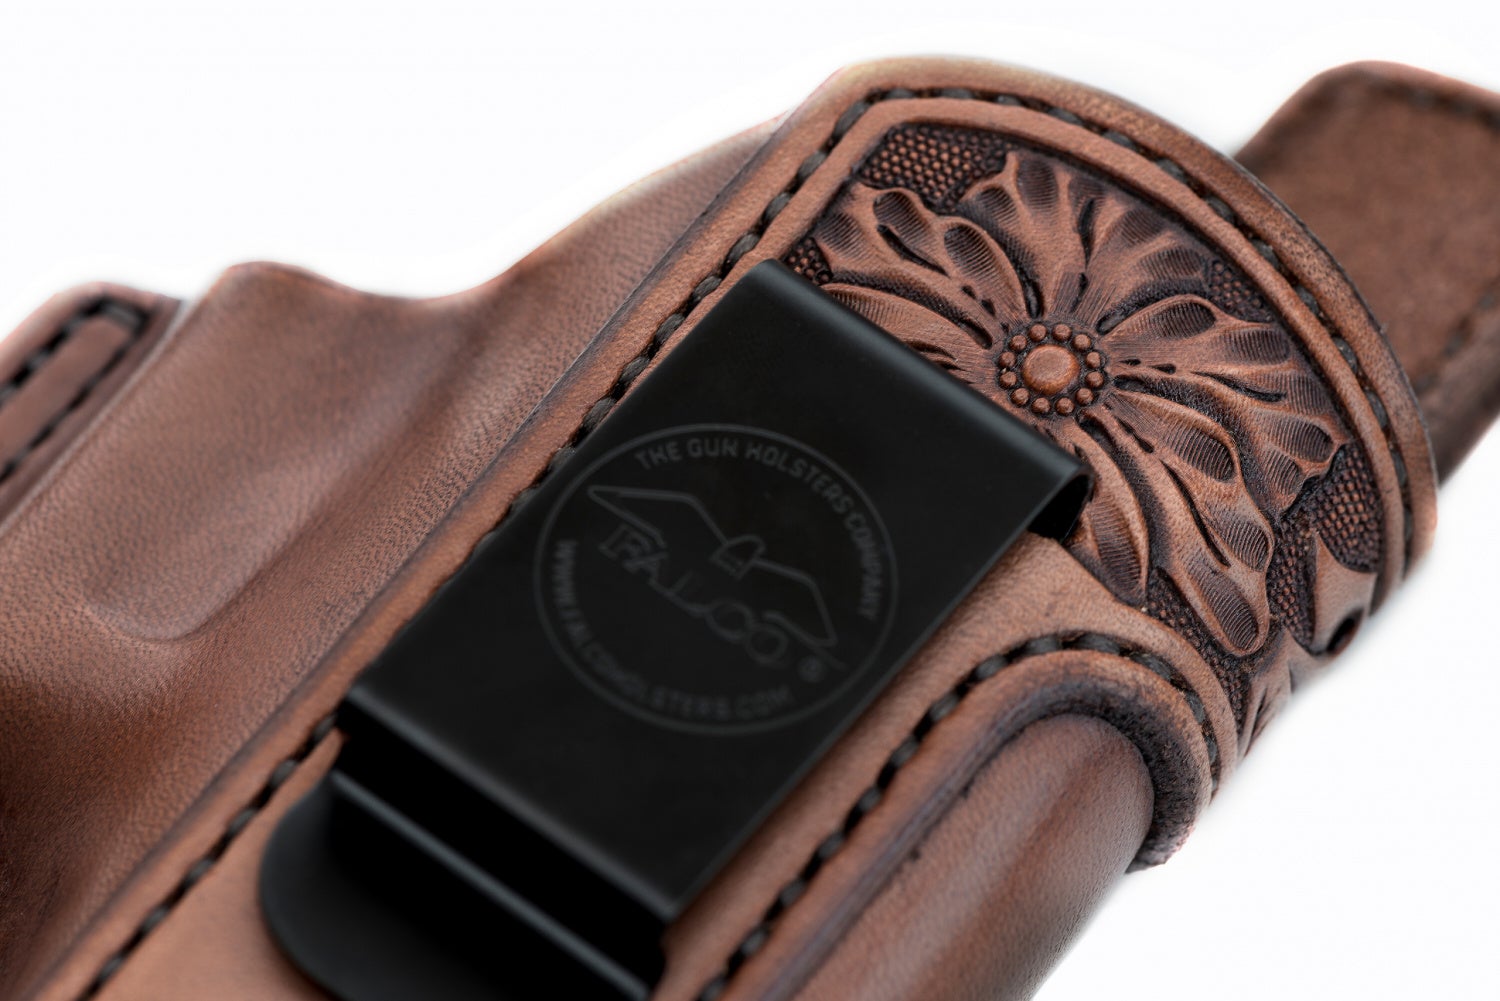 FALCO Holsters Limited Edition Hand-Tooled Holsters